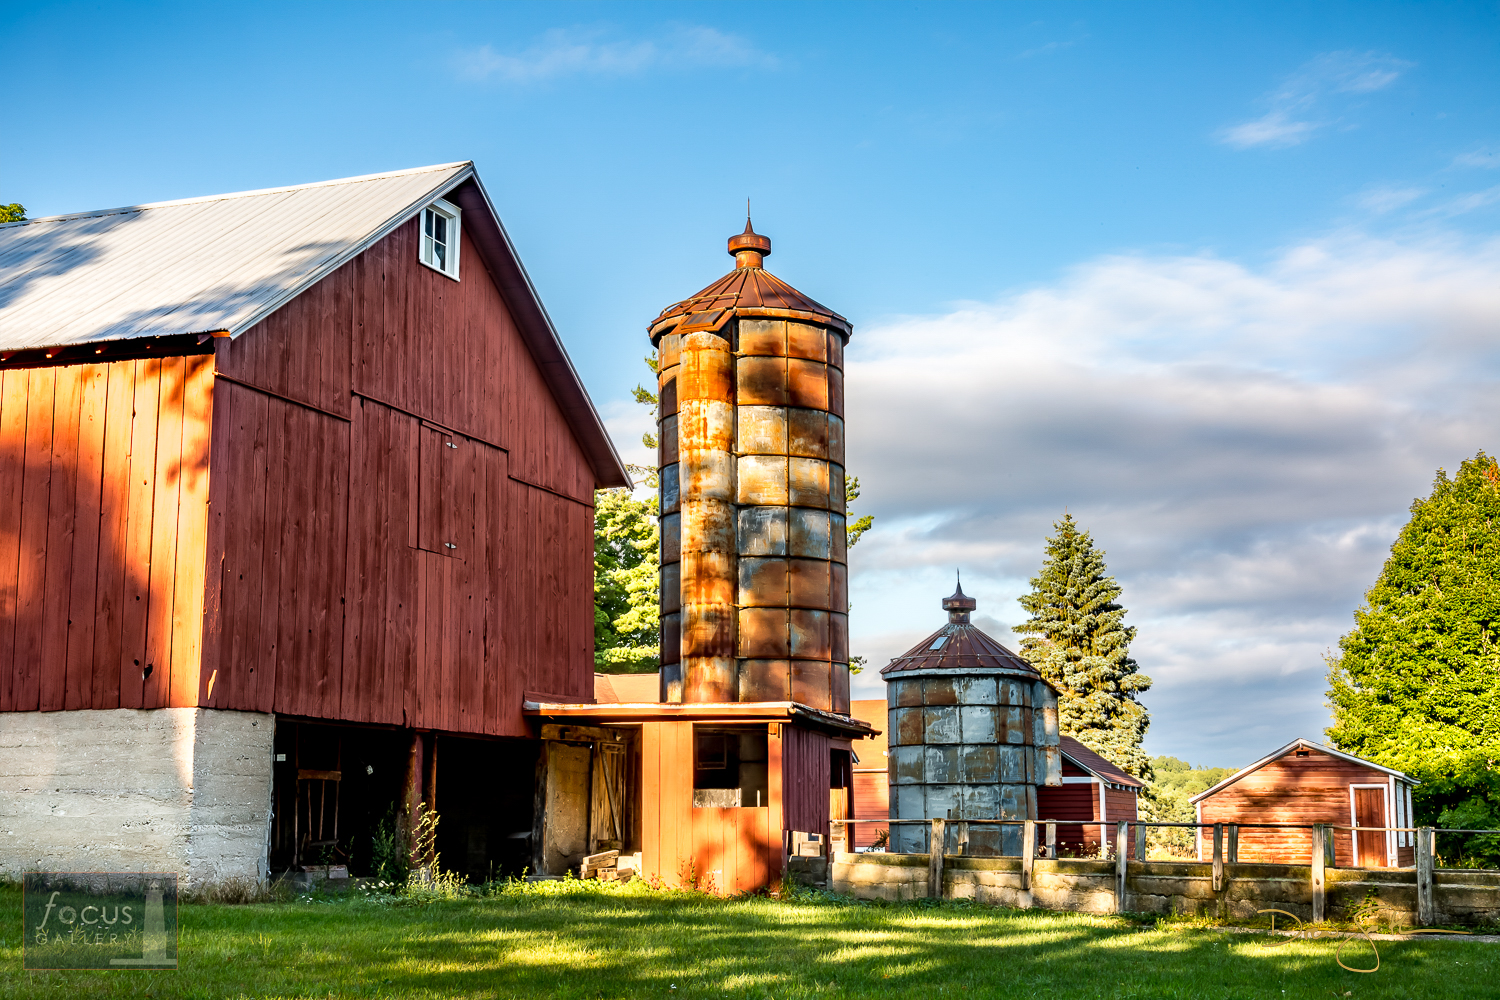 SLBE_Treat_Farm_dsmith_150826_0794-HDR Please use the "Email Focus Gallery" link below for information on available sizes and...